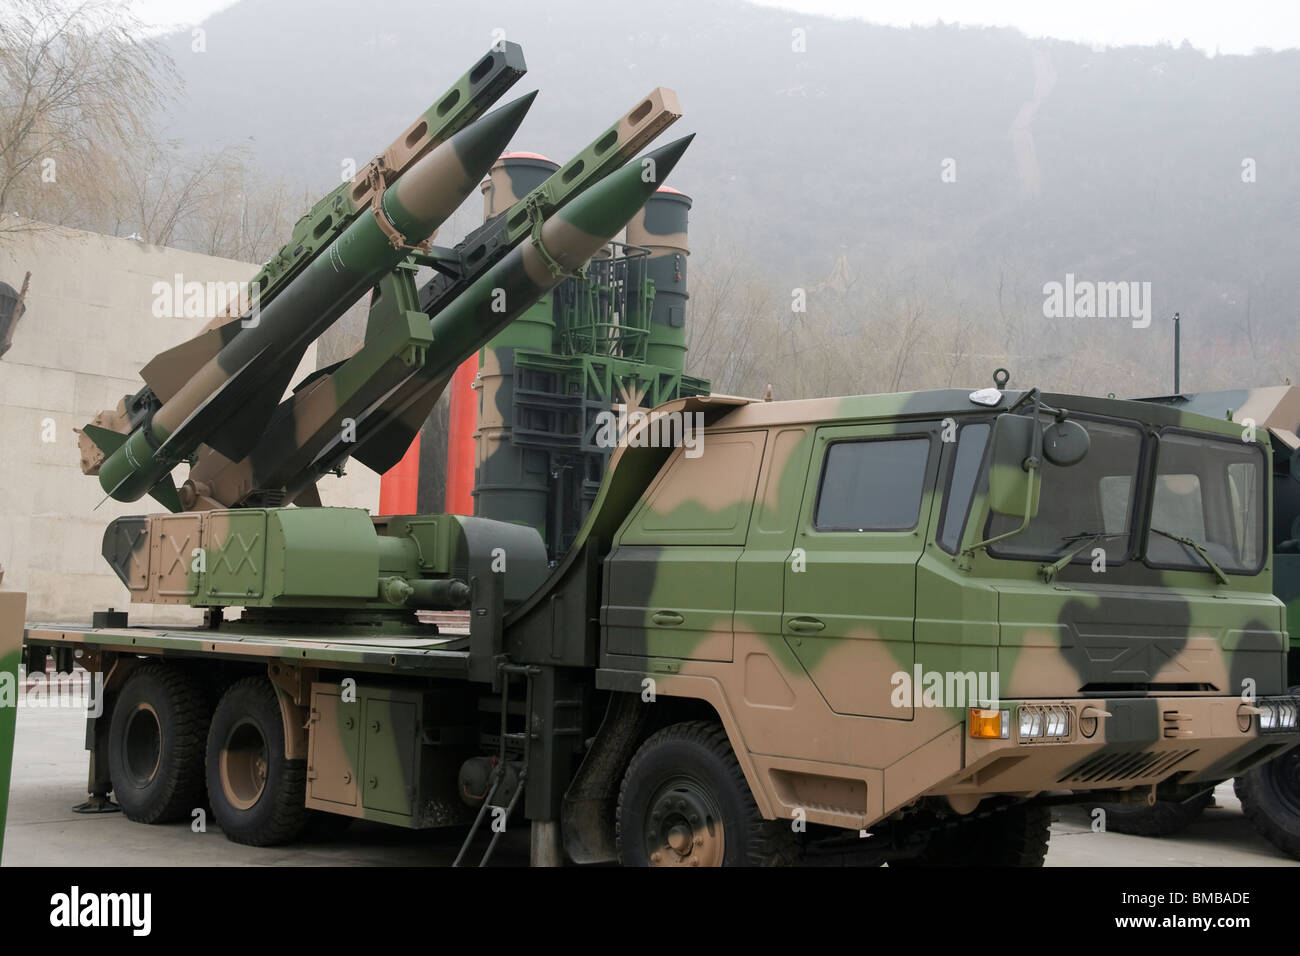 ground-to-air missile vehicle in museum in china Stock Photo